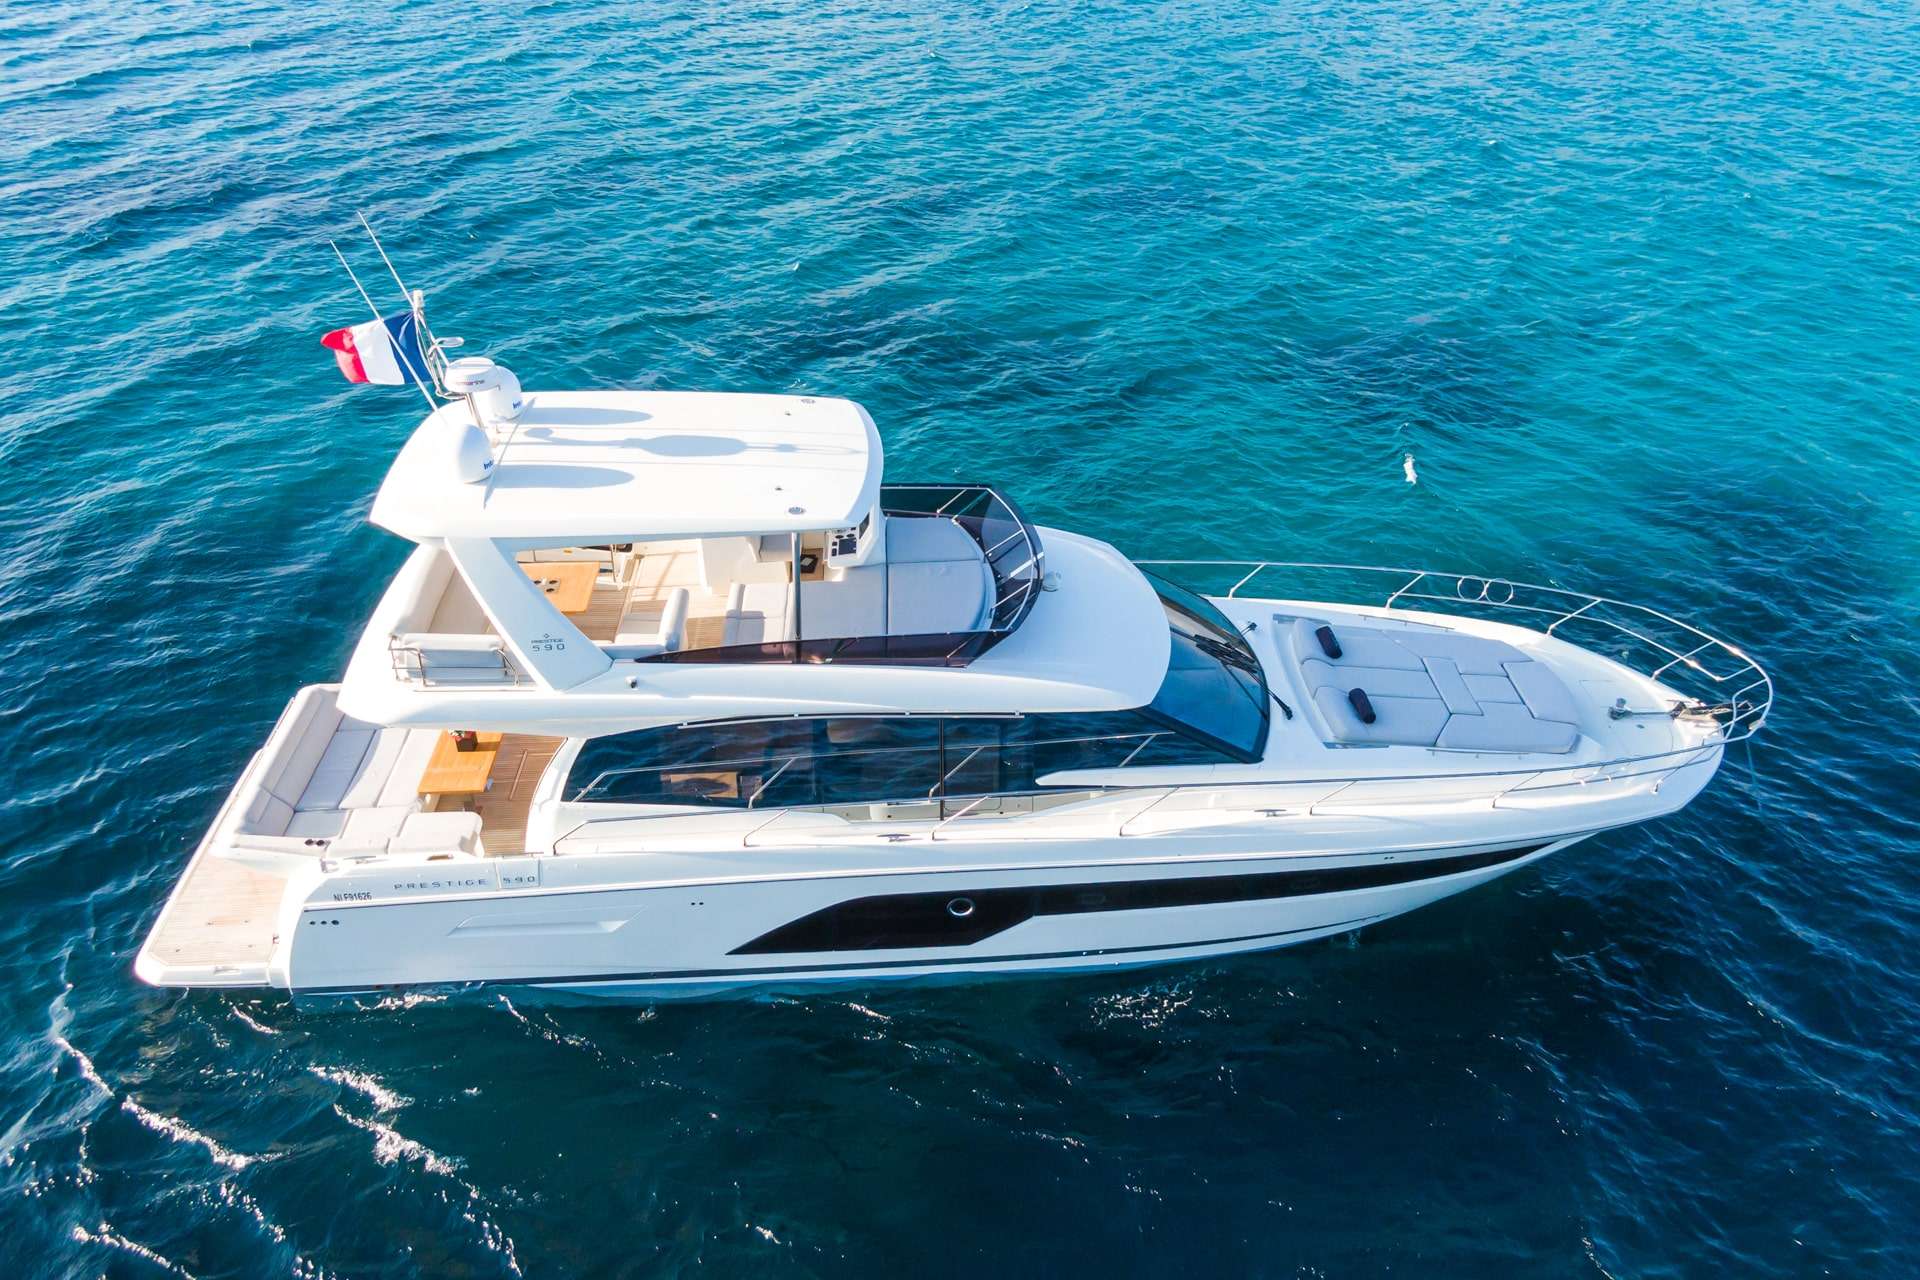 590 Fly - Luxury yacht charter France & Boat hire in France French Riviera Cannes Vieux port de Vallauris 3